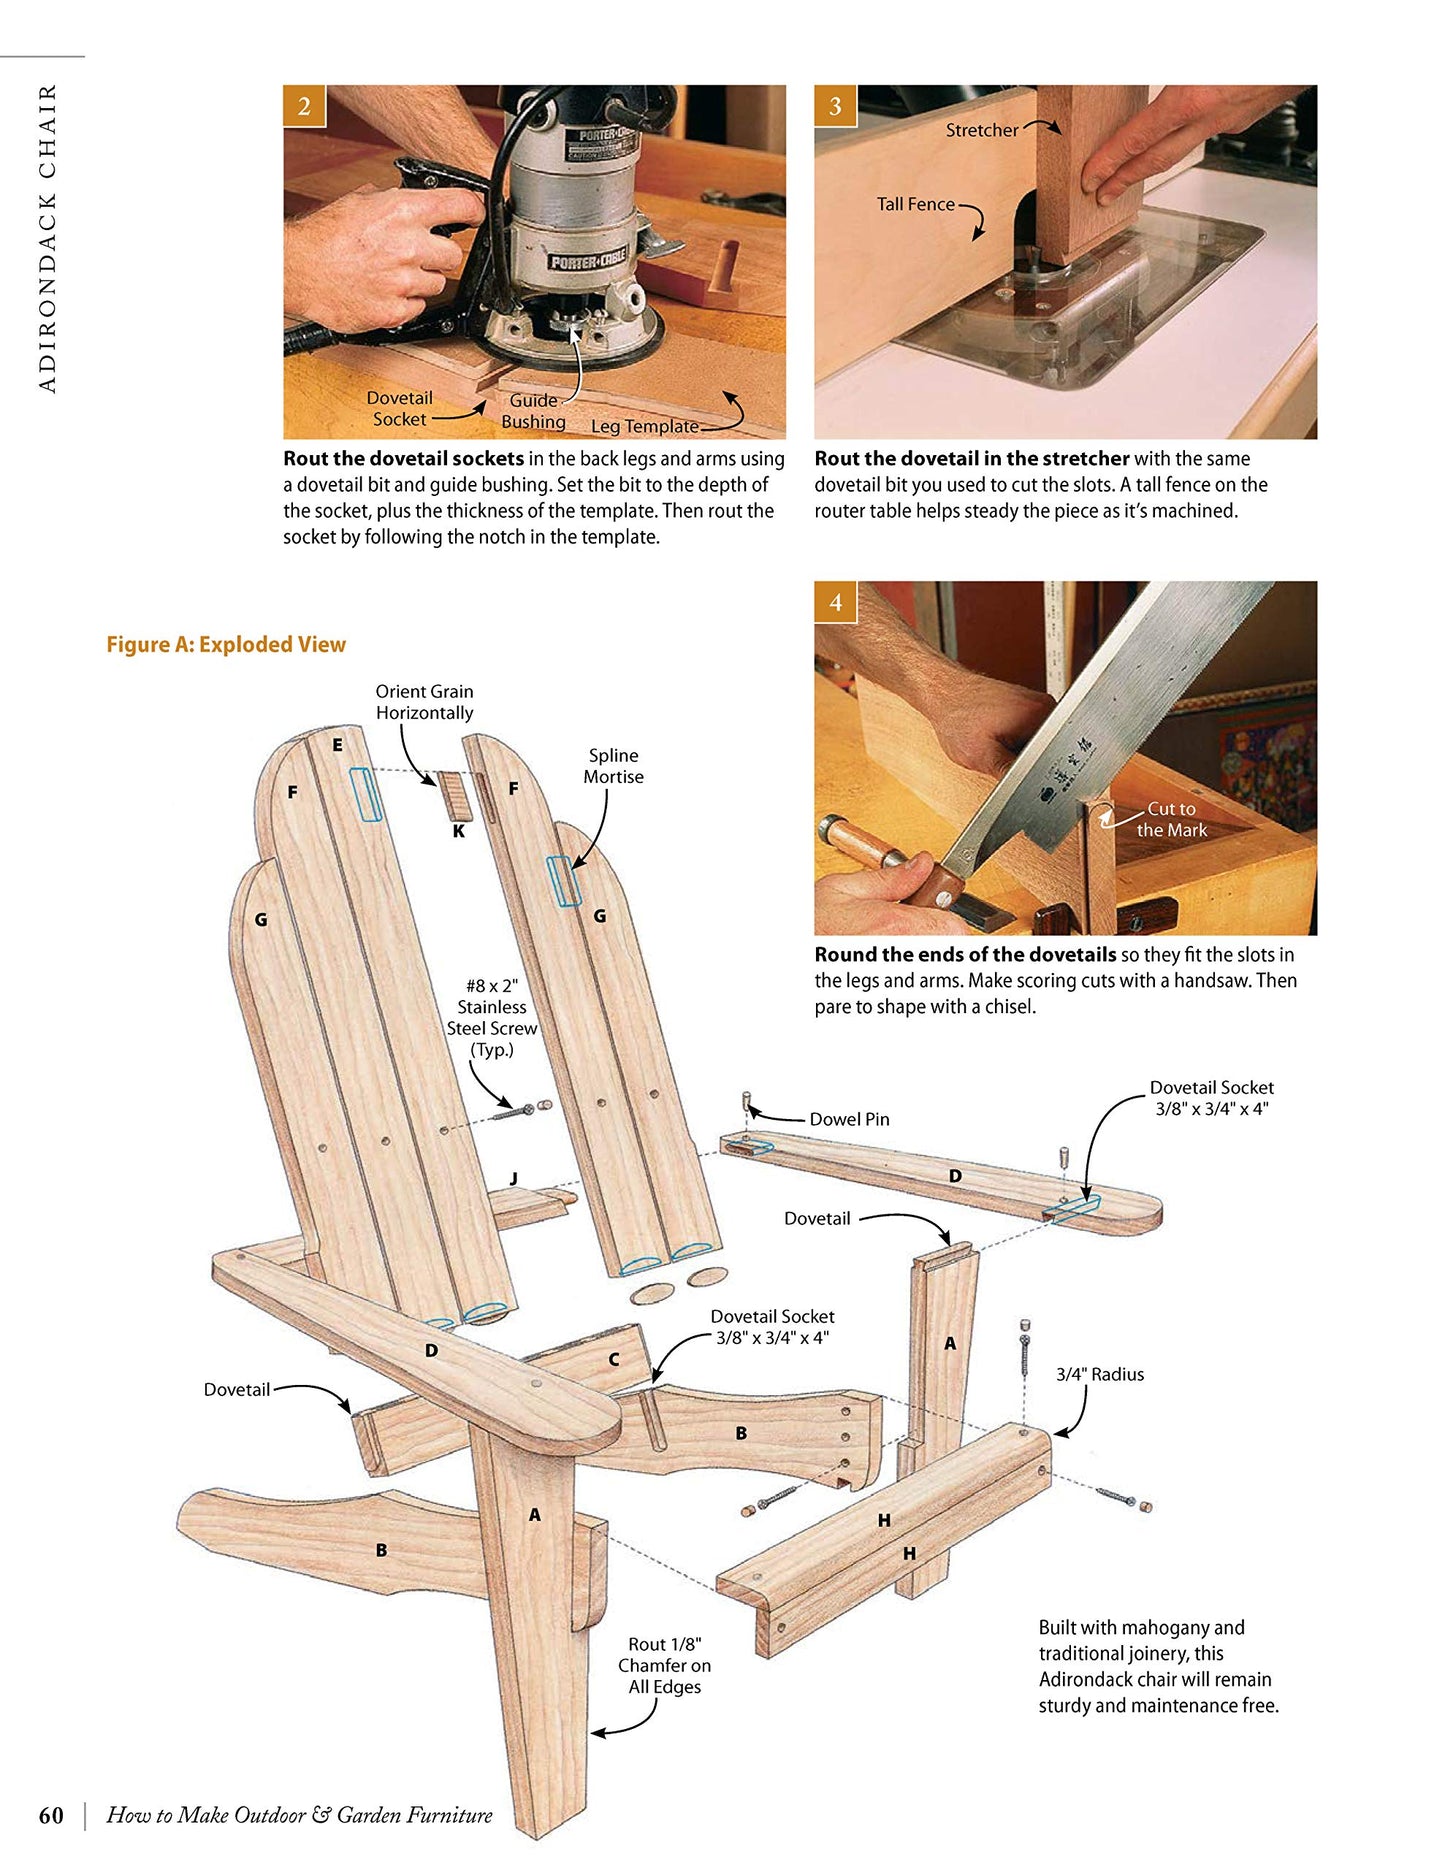 How to Make Outdoor & Garden Furniture: Instructions for Tables, Chairs, Planters, Trellises & More from the Experts at American Woodworker (Fox Chapel Publishing) 22 Decorative Step-by-Step Projects